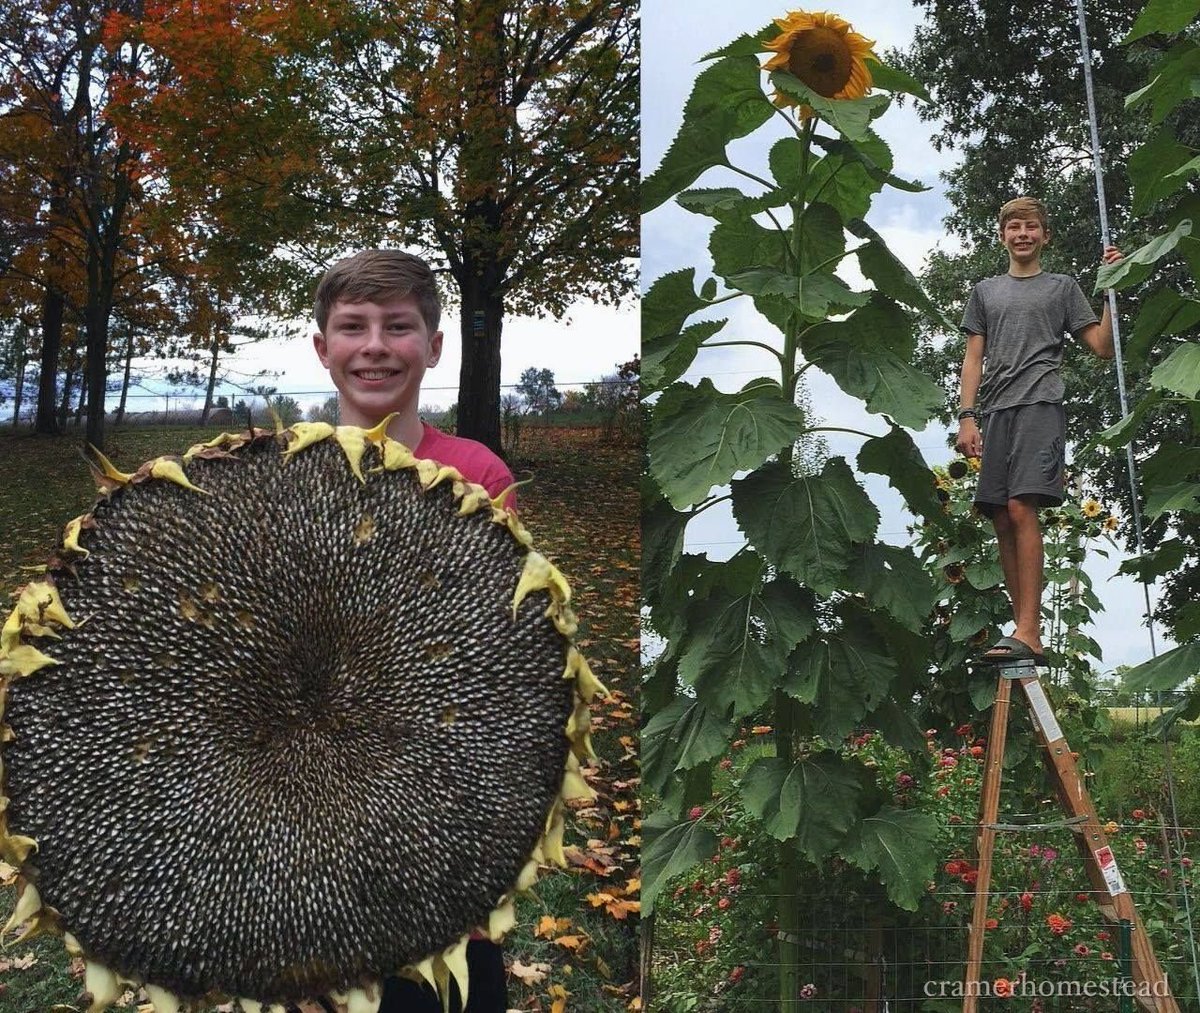 'What can I say. He knows how to grow a sunflower. 🌻 This is the result of saving the seeds from his biggest sunflower each year. Everyone always asks “what variety?”...
👉Read more in reply